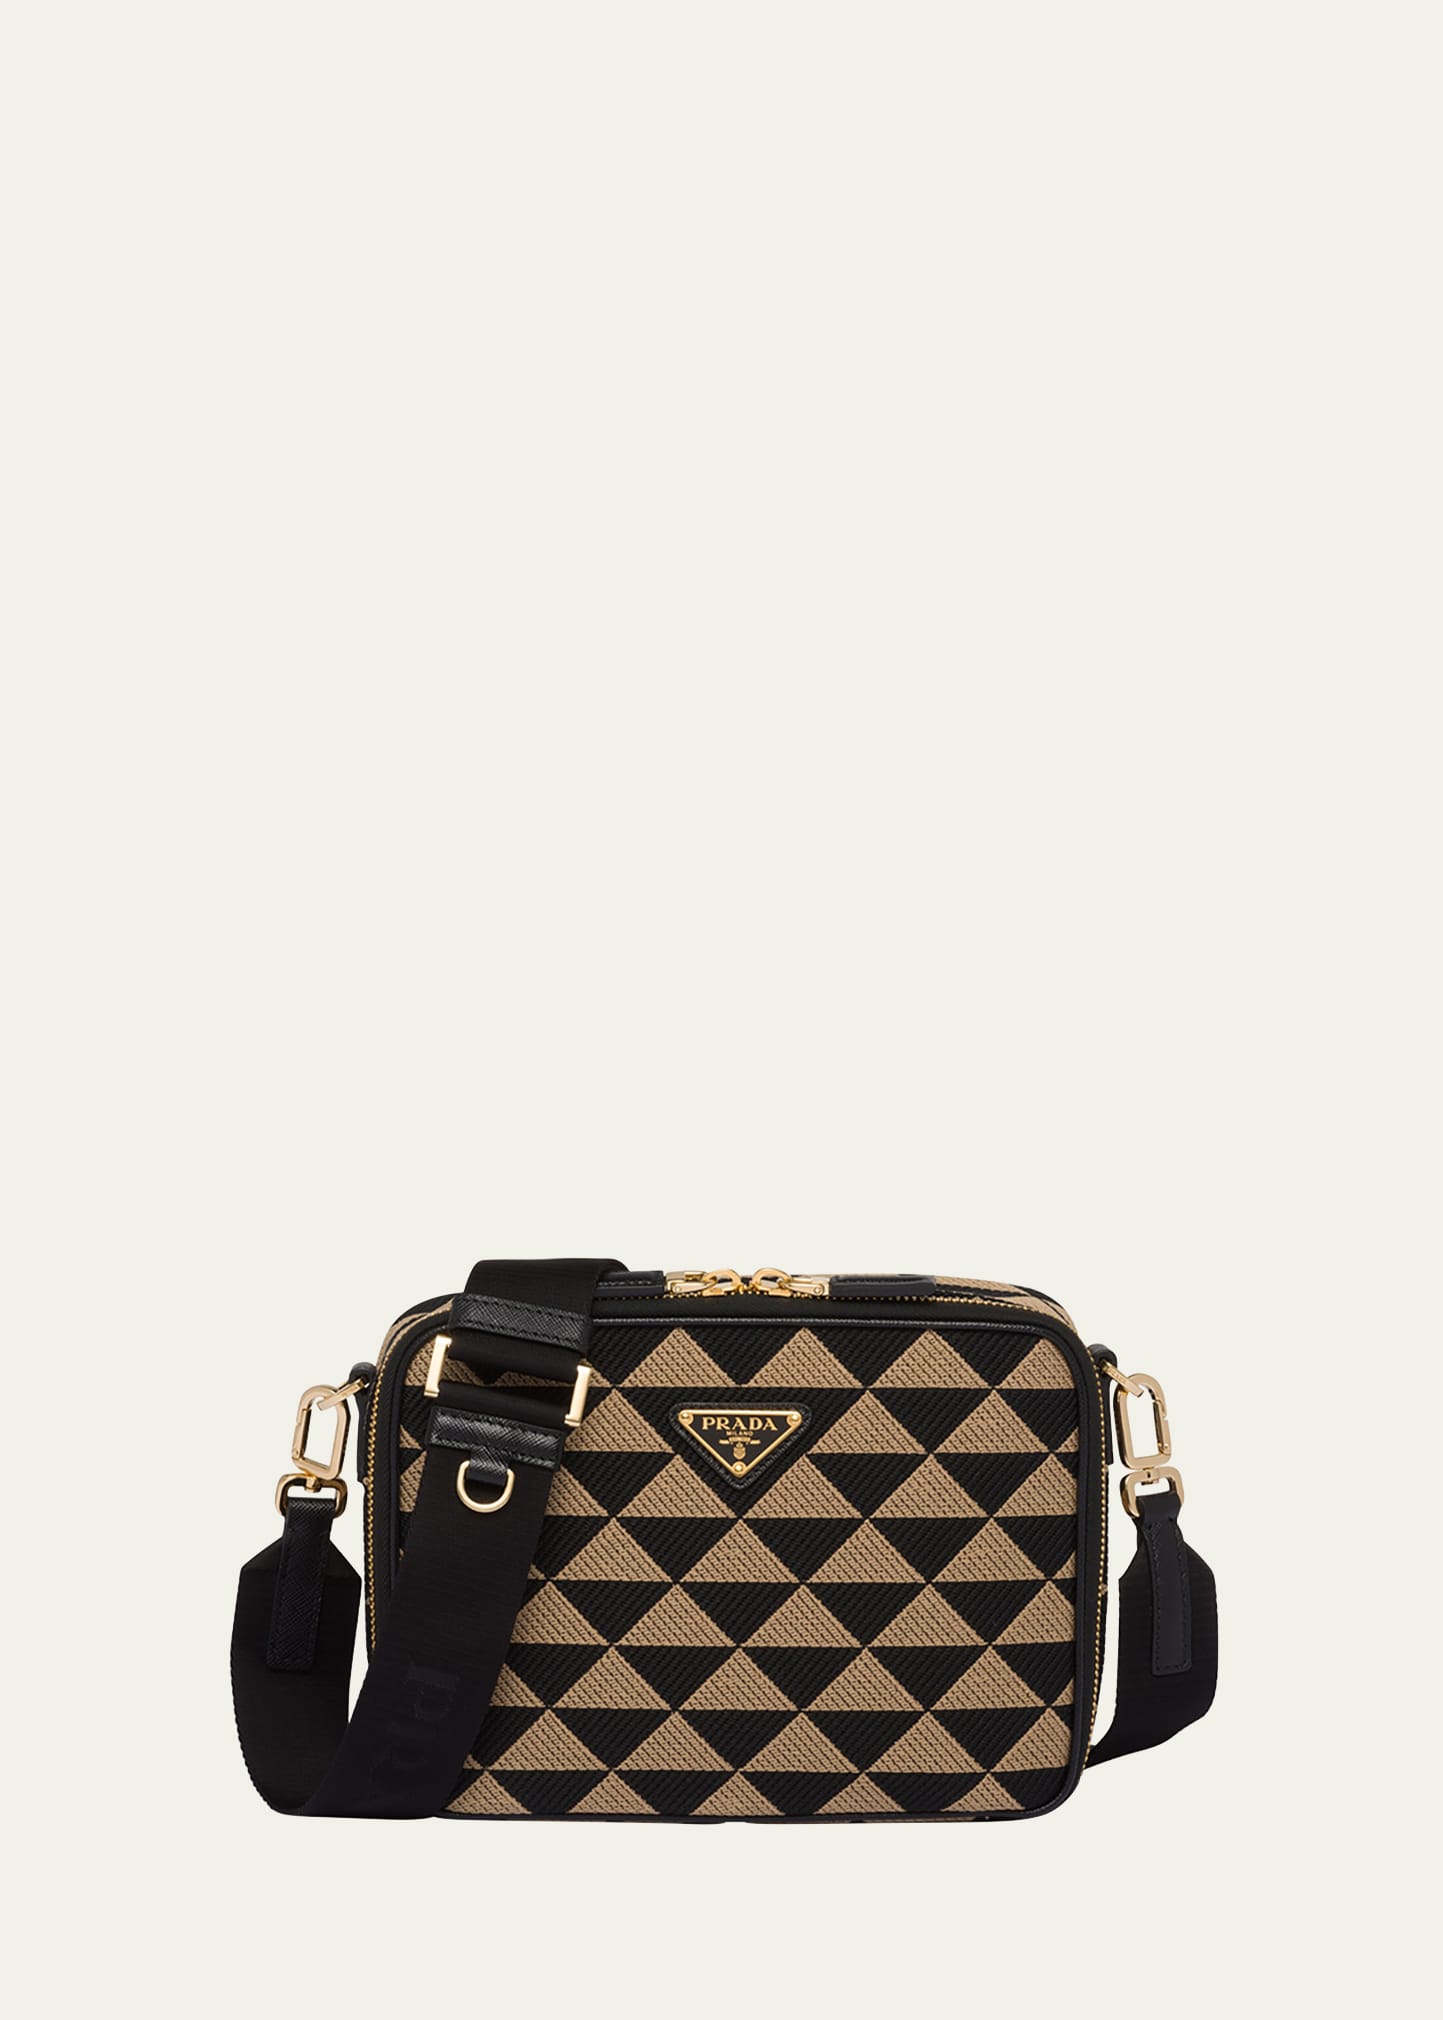 Shop Triangles Bag Fashion Crossbody Bags For Men And Women